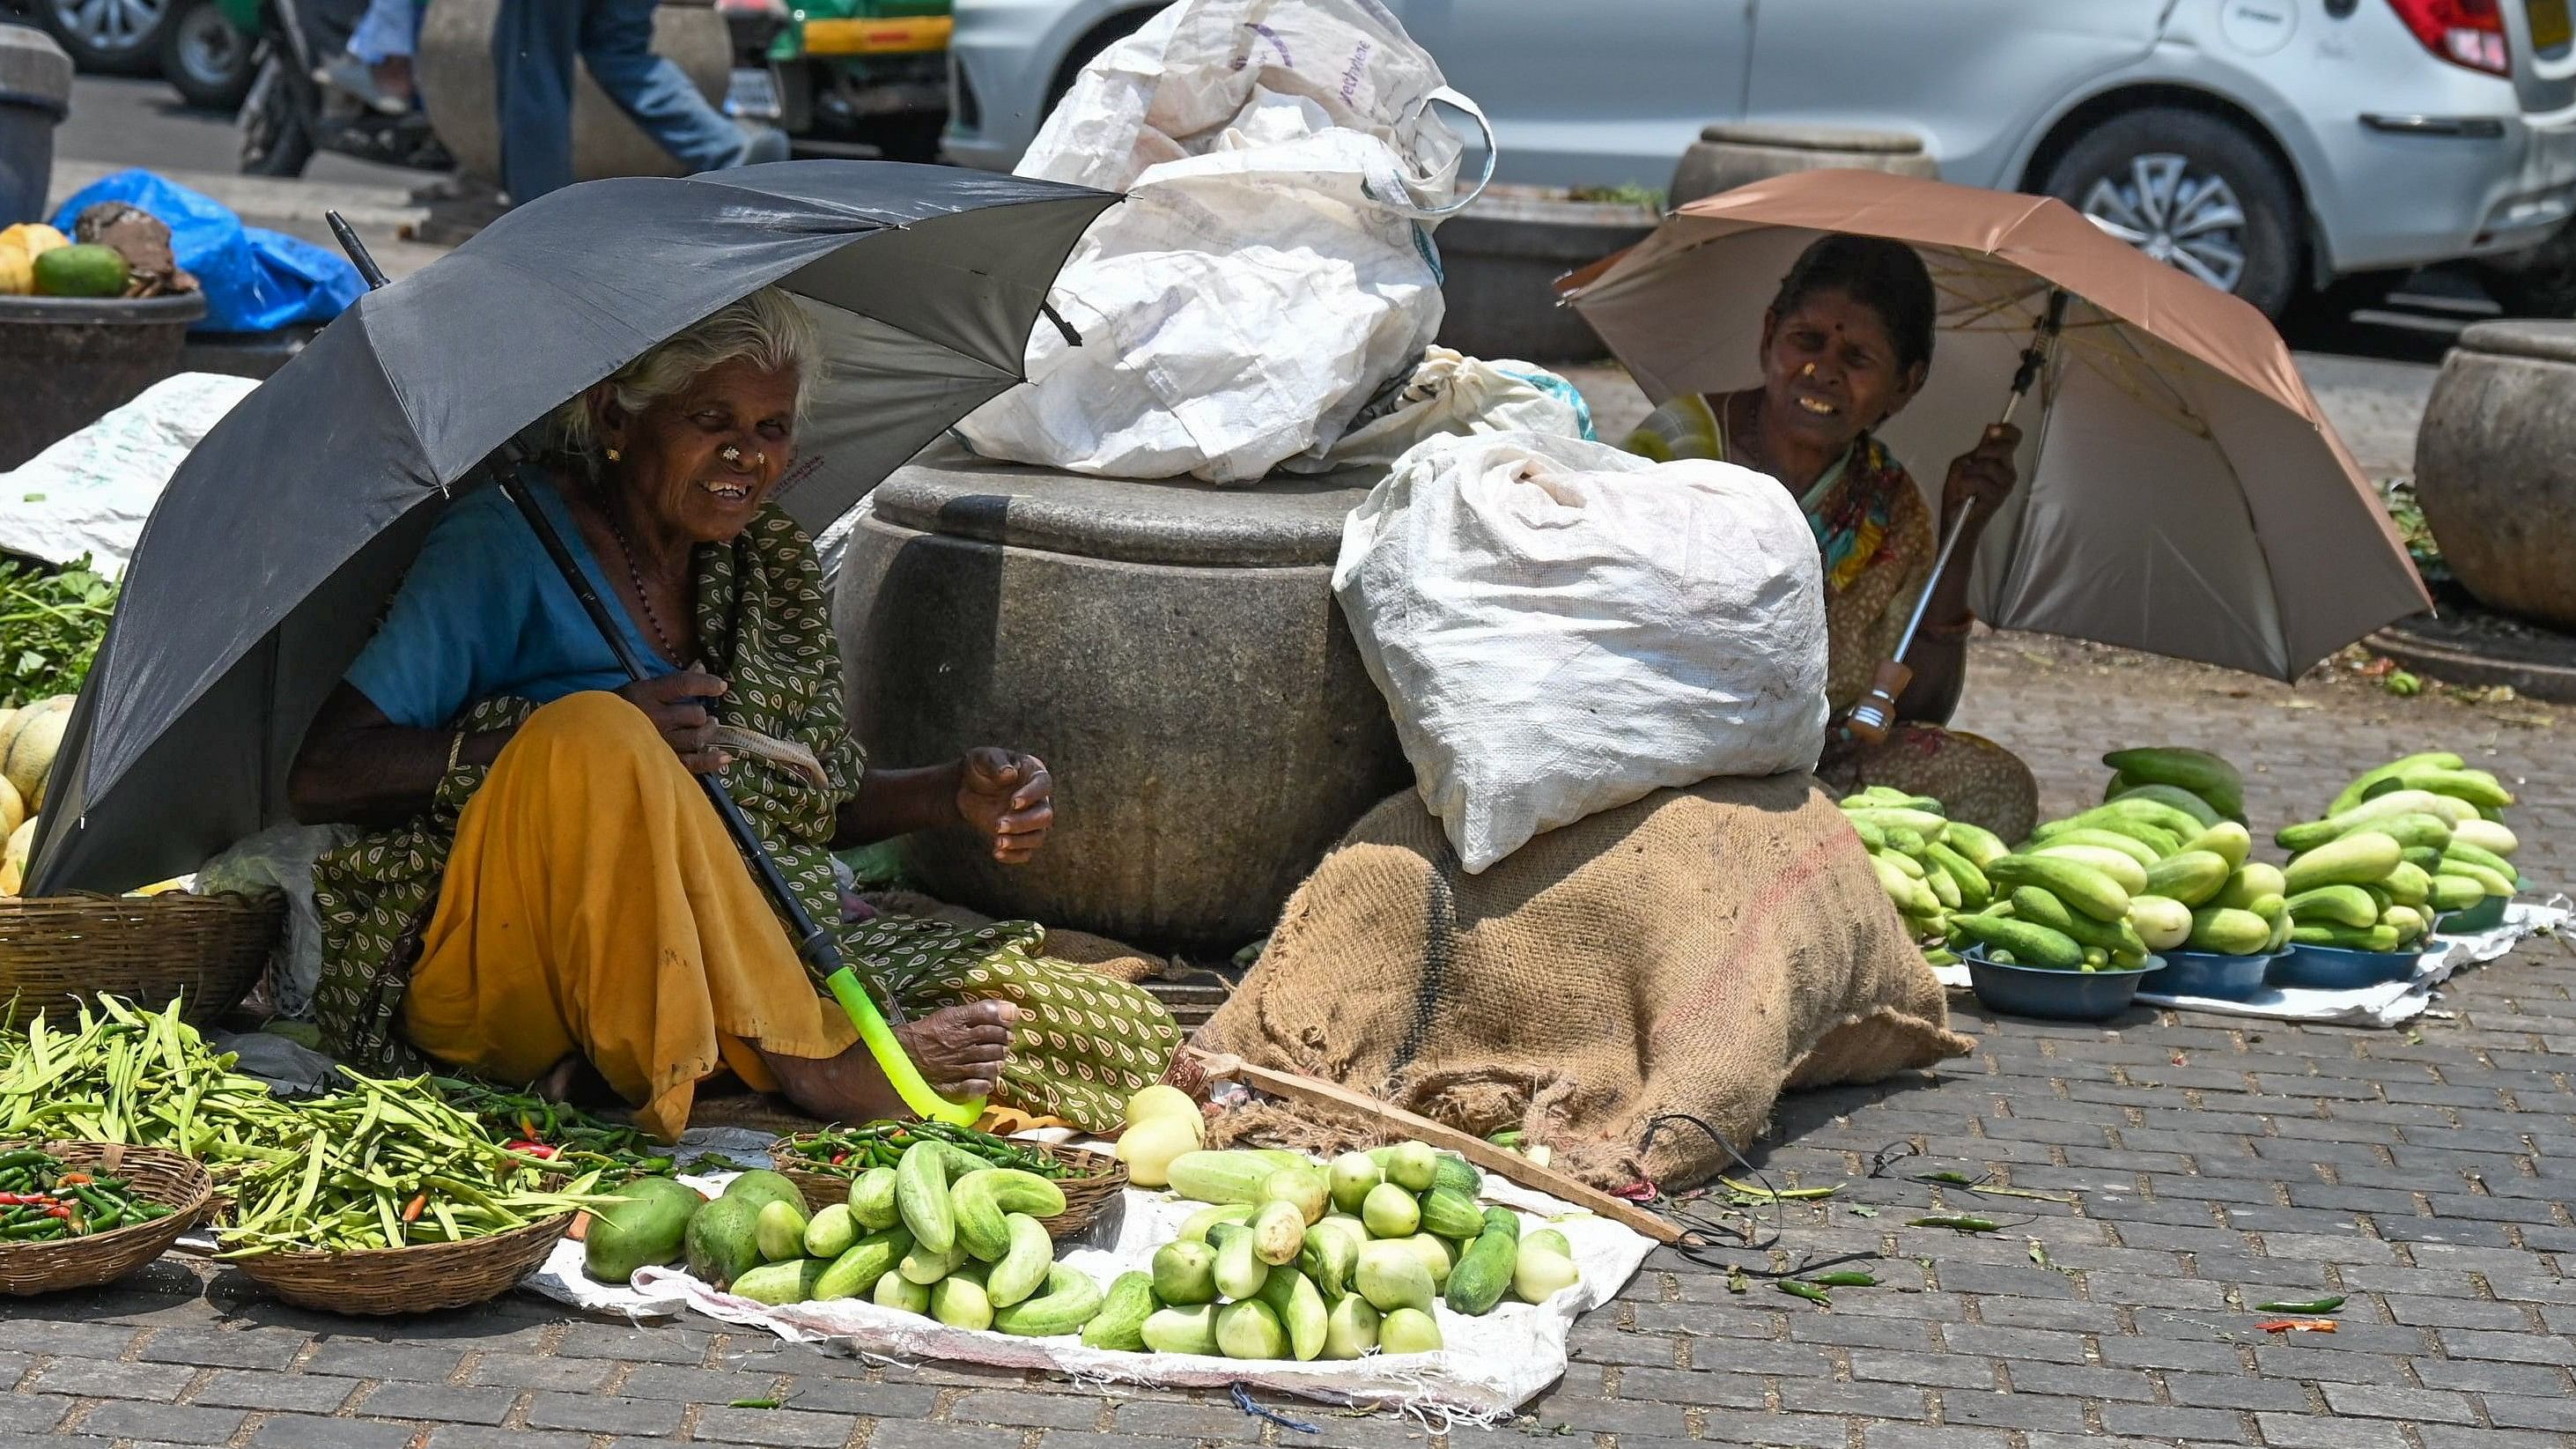 <div class="paragraphs"><p>Vendors use umbrellas to shield themselves from the scorching heat at Kalasipalyam.</p></div>